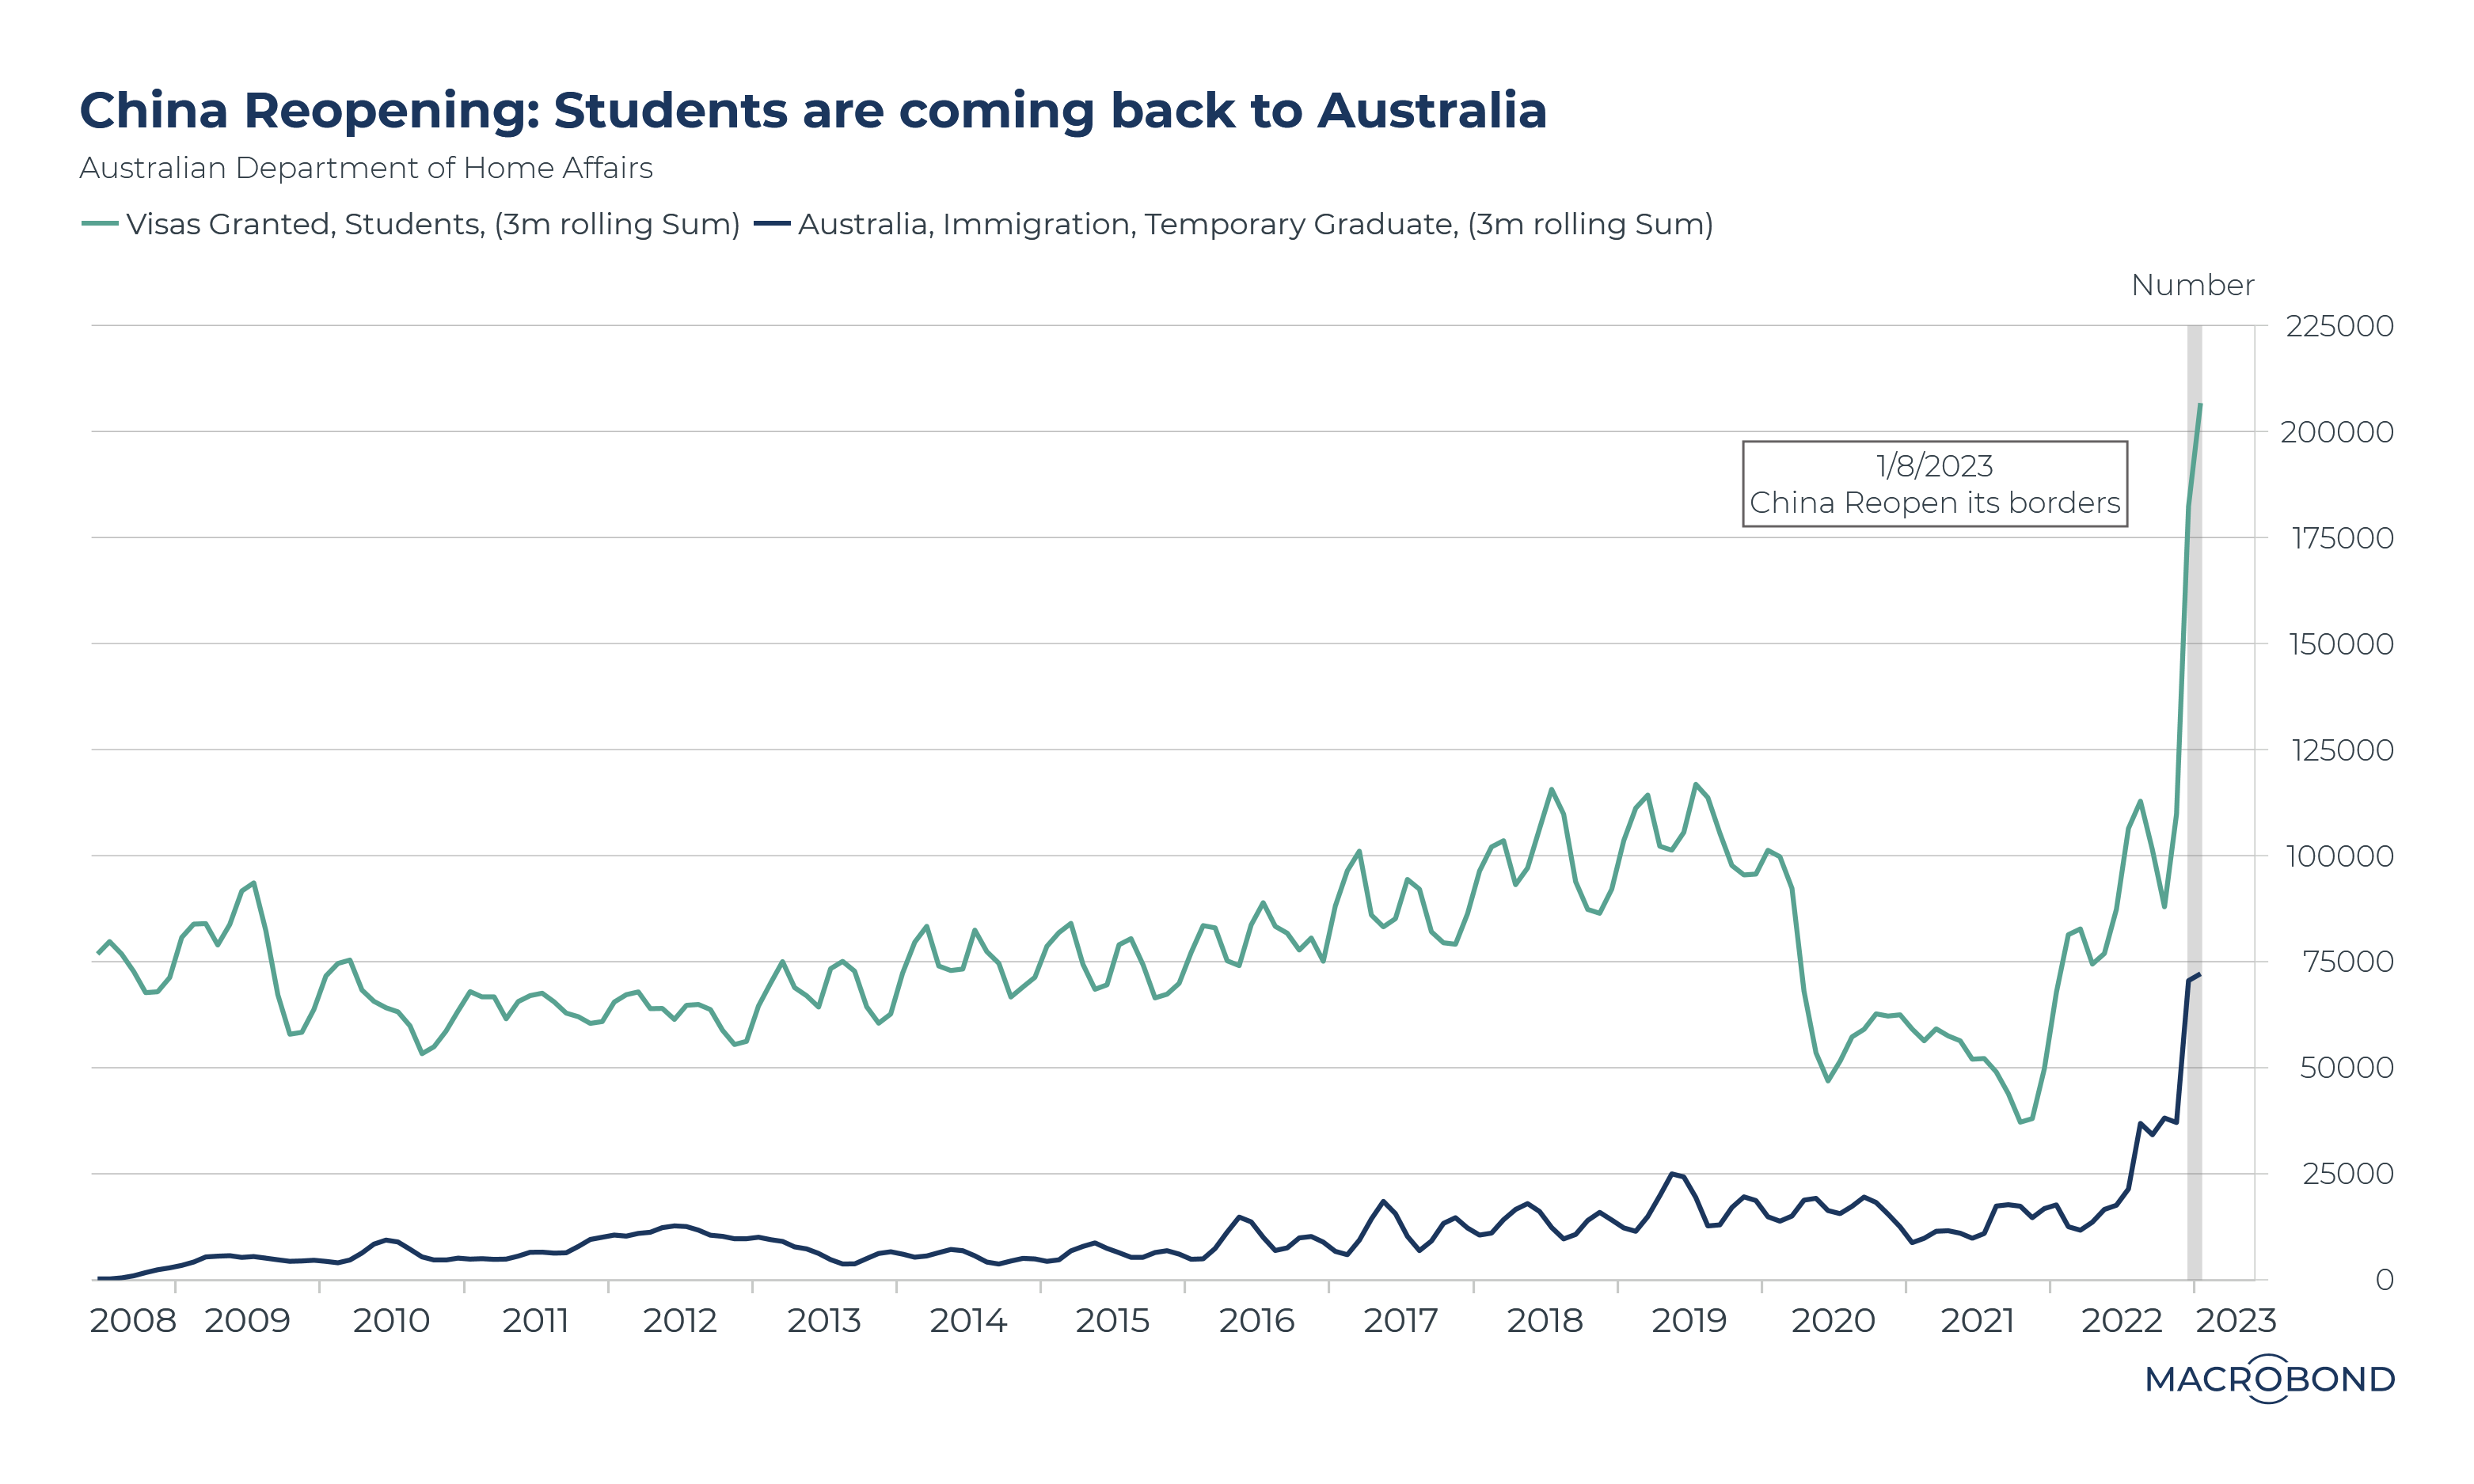 All signs point to Chinese students returning to Australia